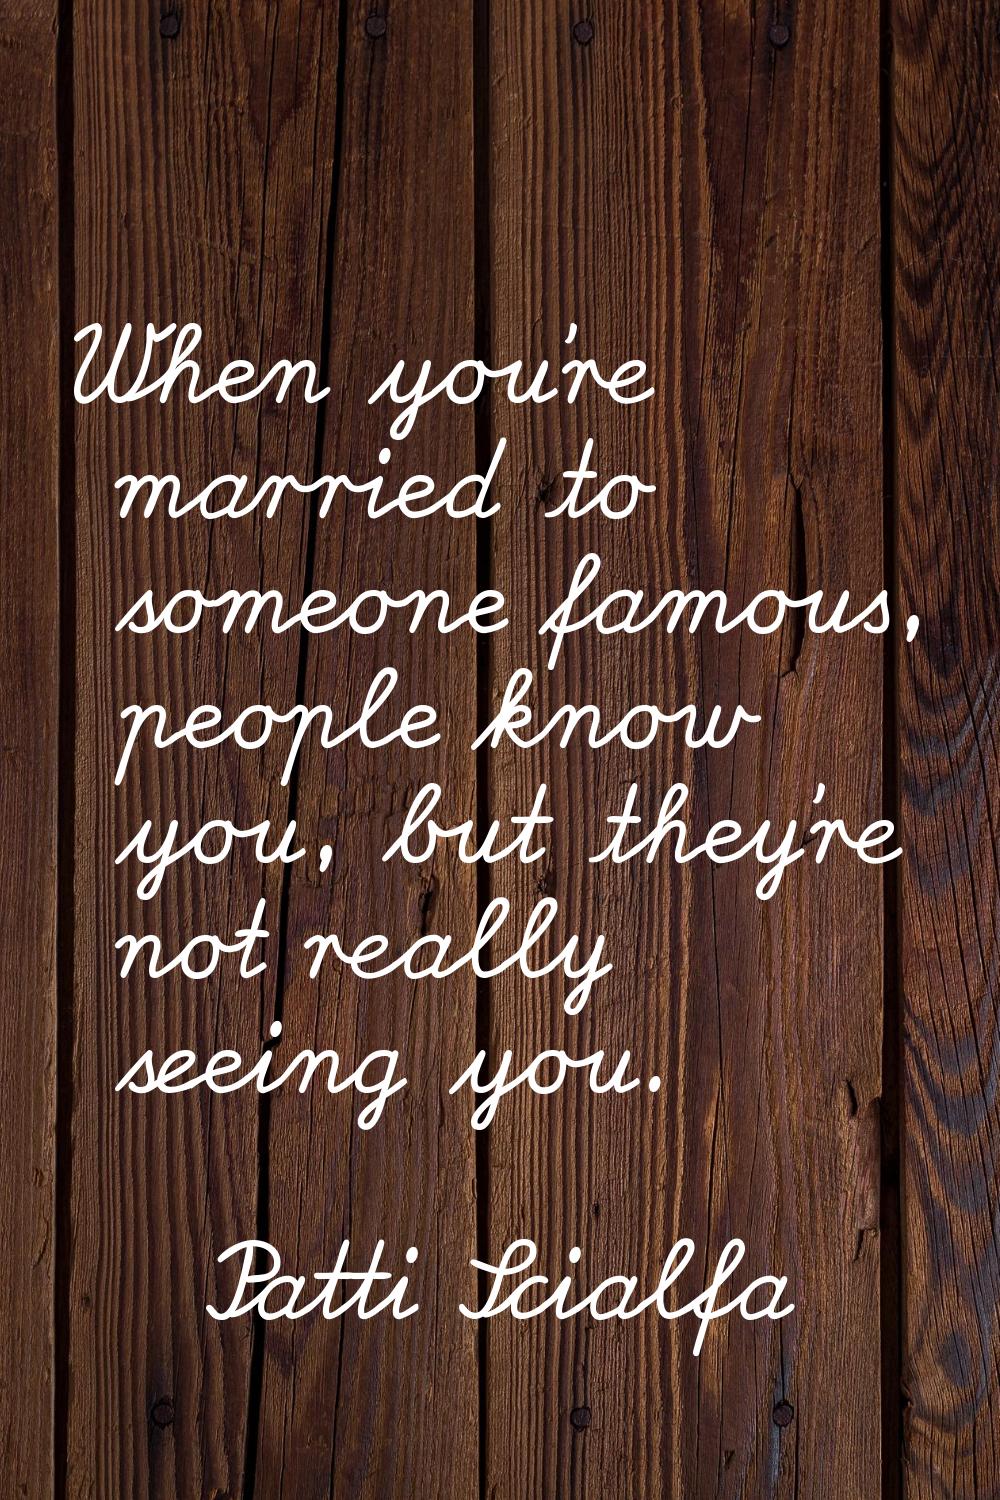 When you're married to someone famous, people know you, but they're not really seeing you.